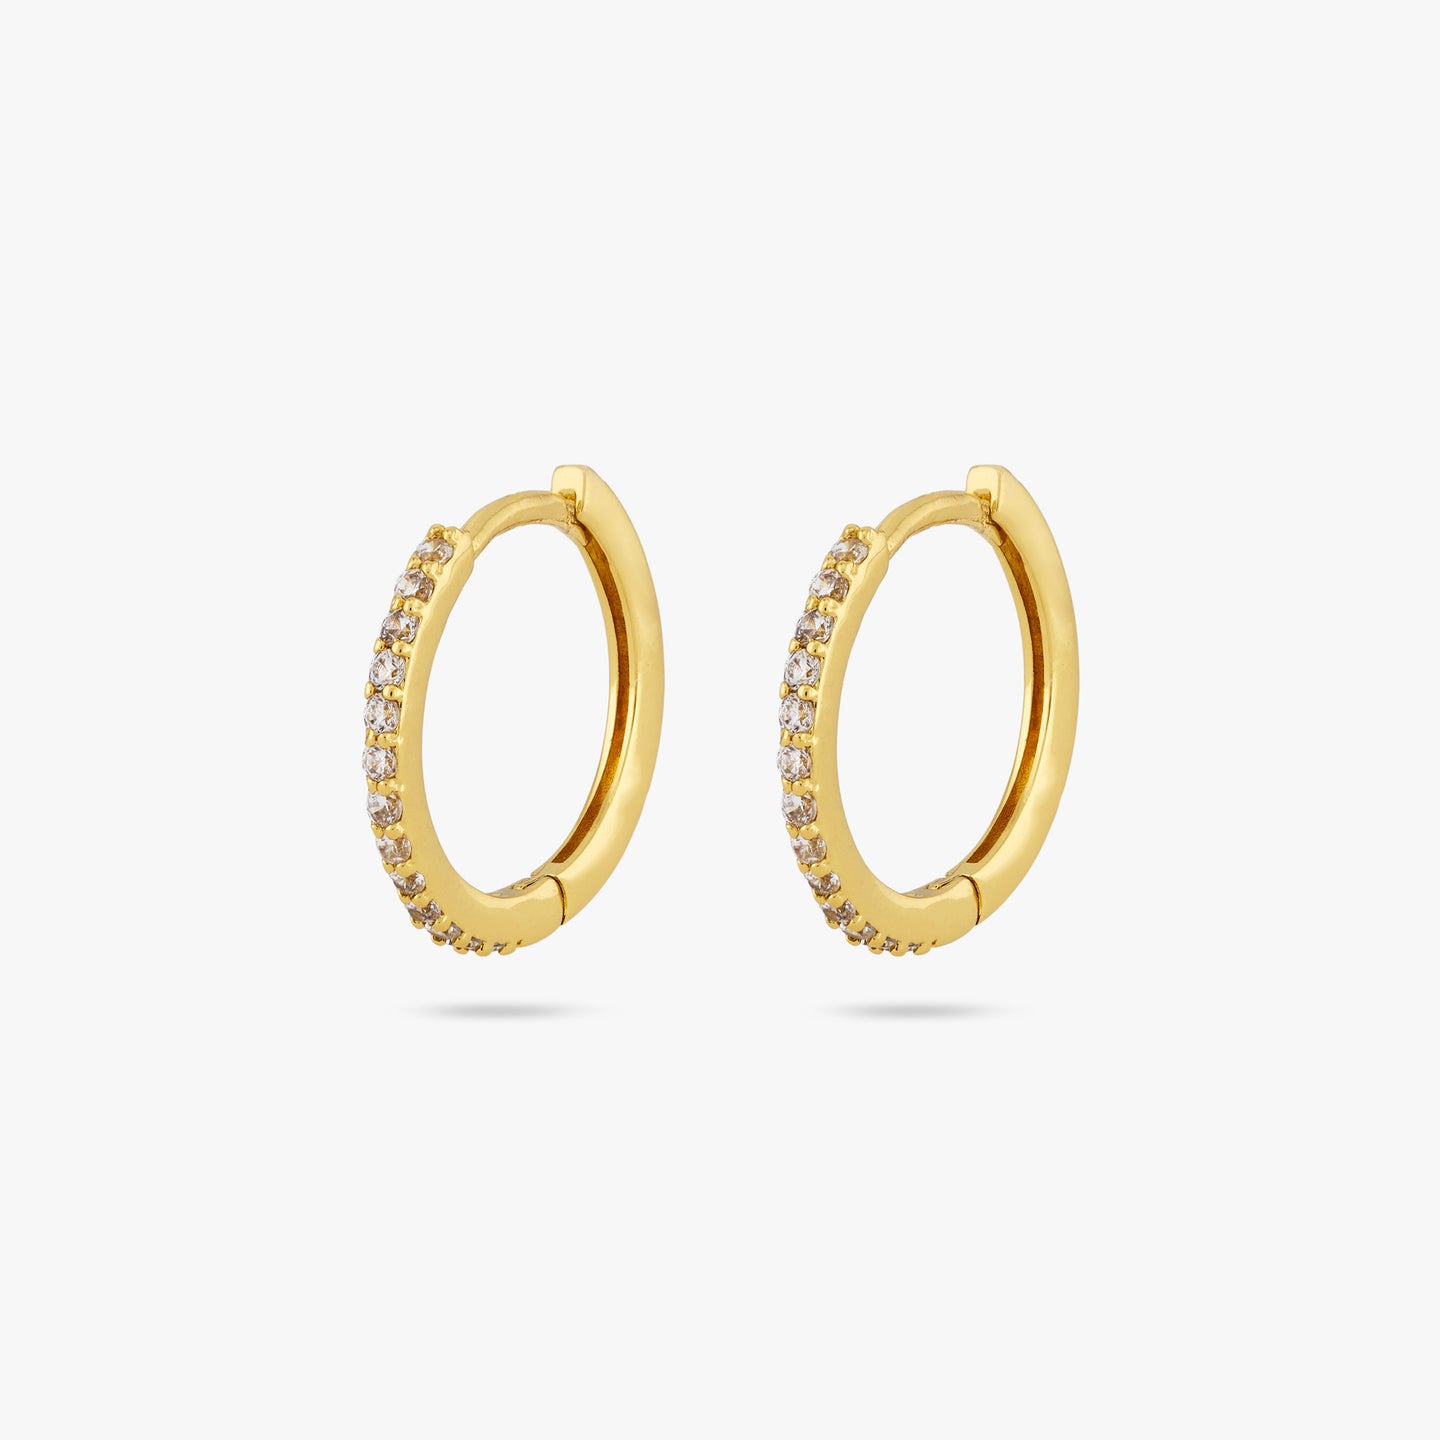 This is a pair of small gold hoops with clear cz gems along the front of them [pair] color:null|gold/clear